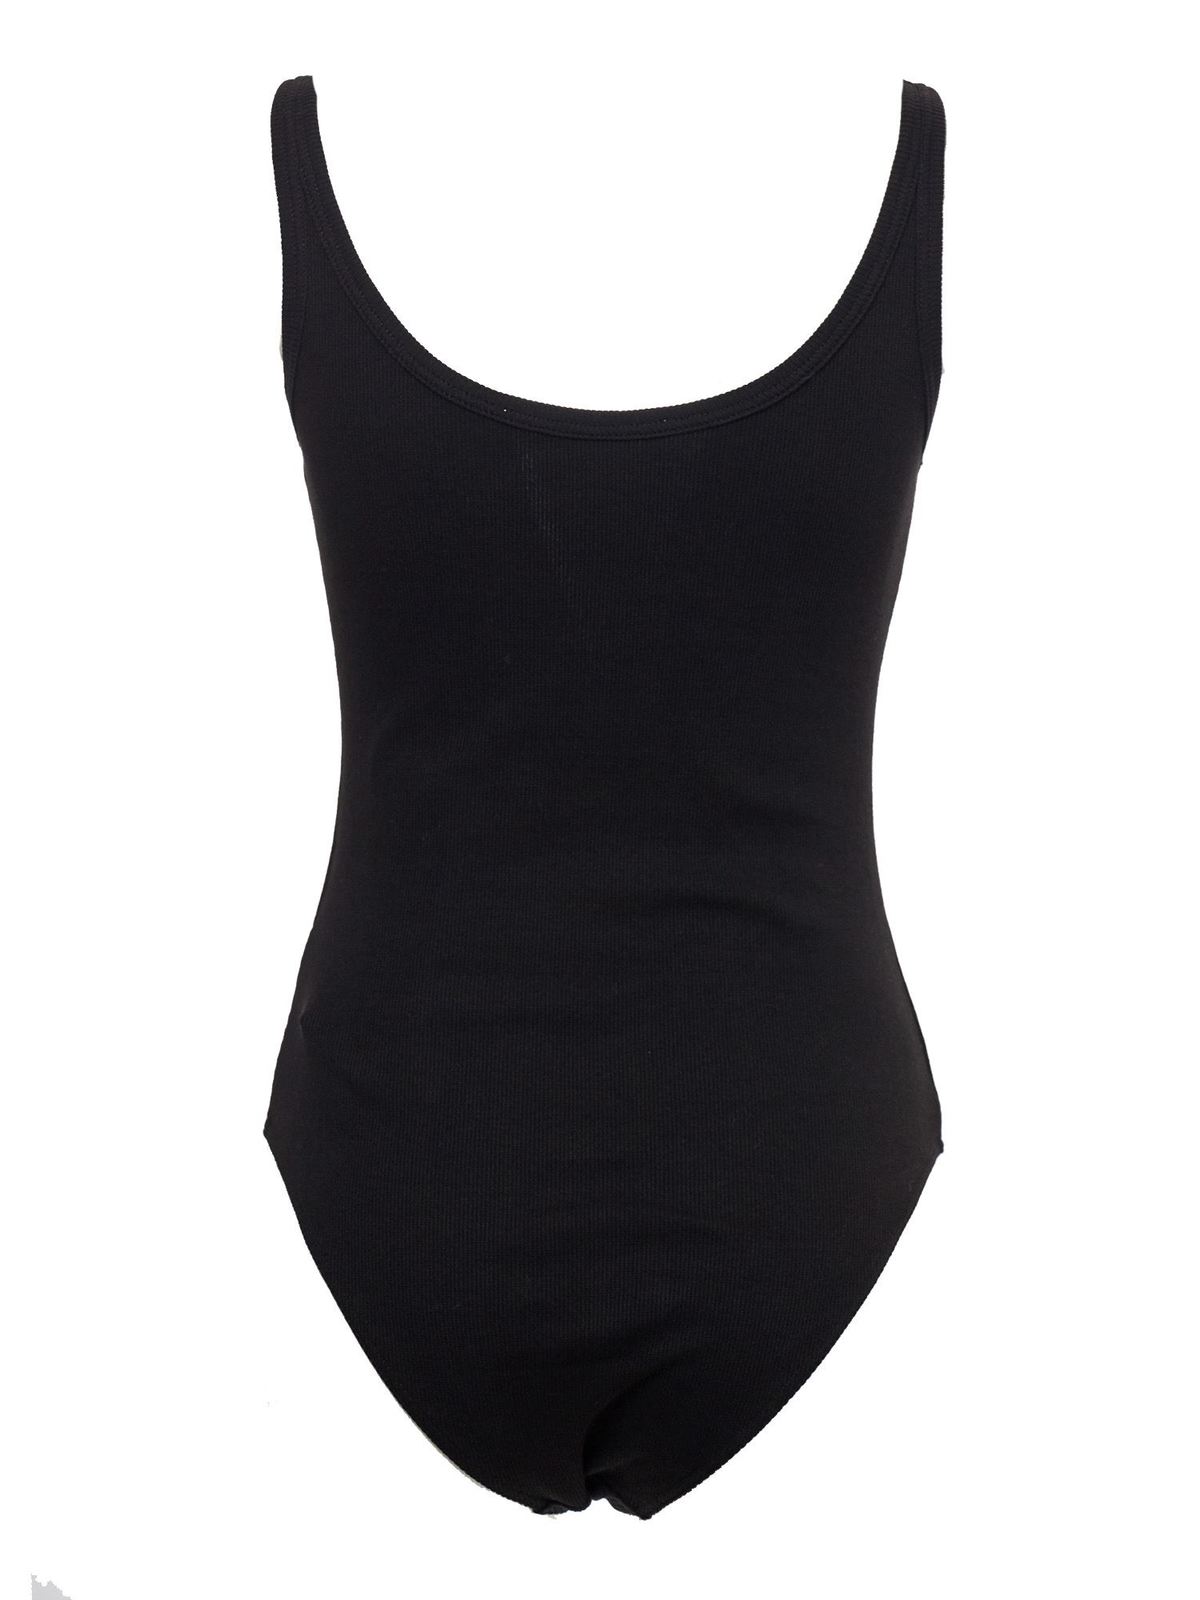 Tops & shirts Off-White - Logo ribbed body in black - OWDD026R21FAB0011001